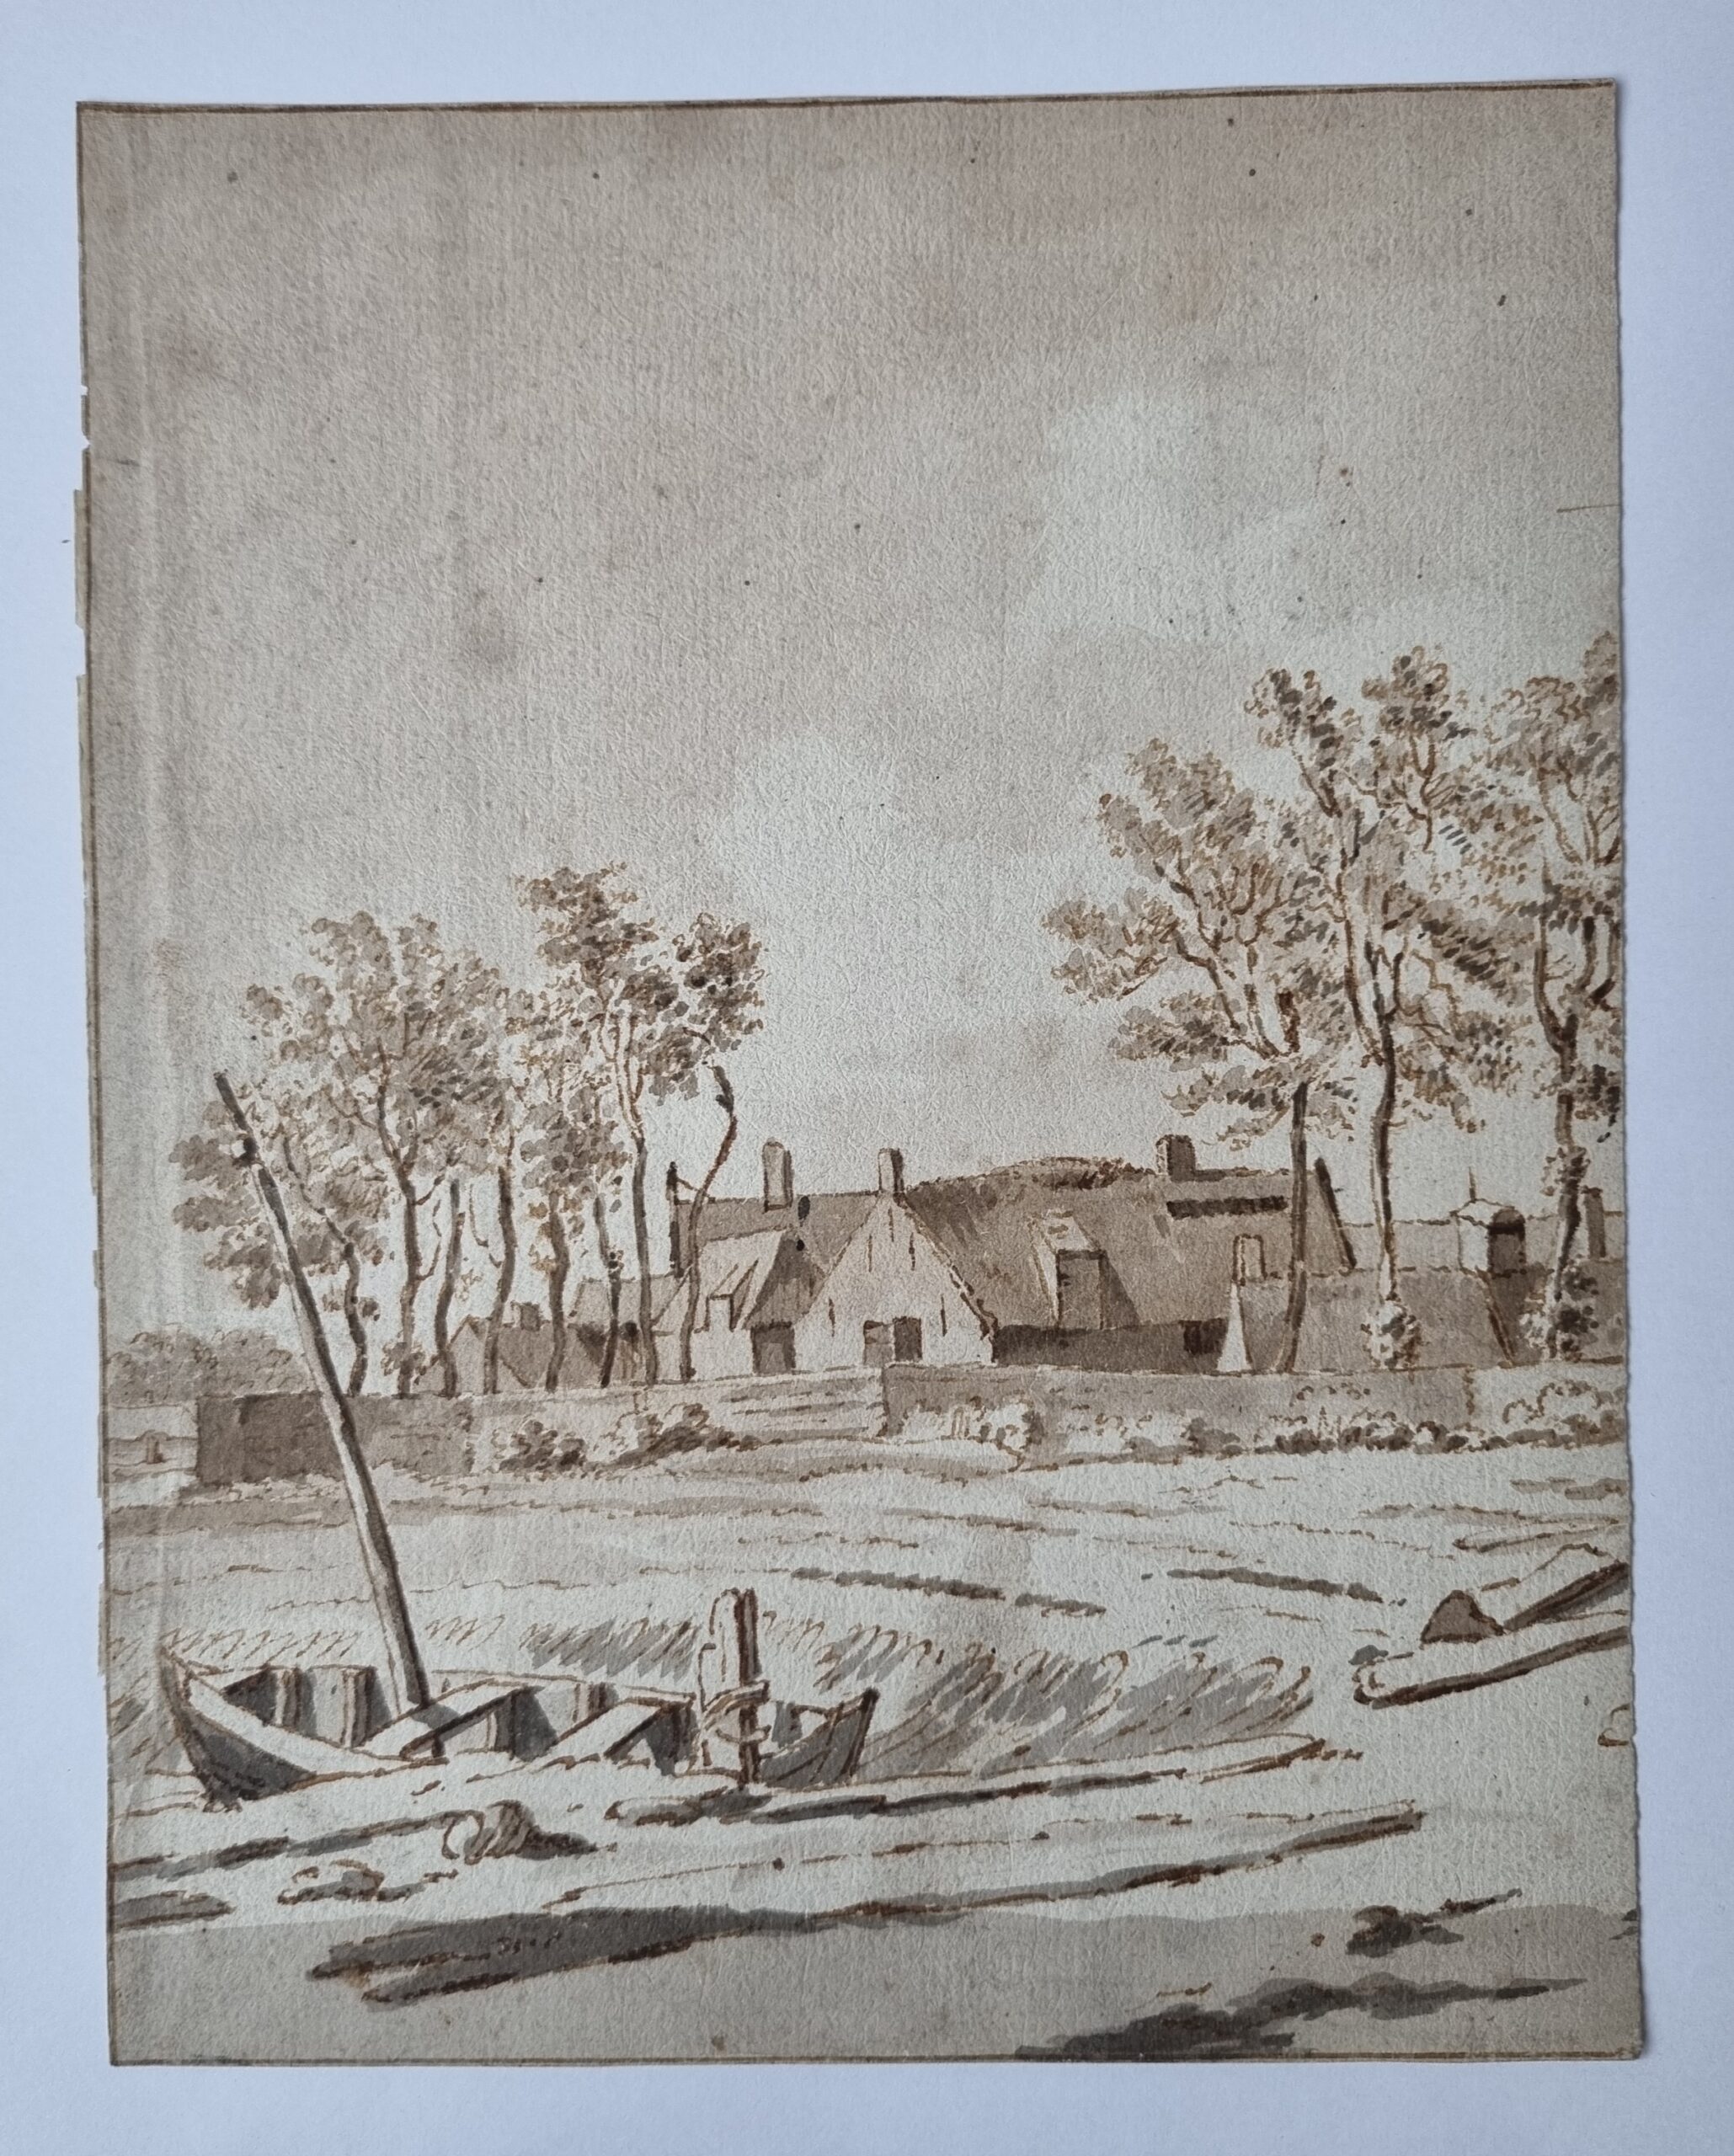  - [Antique drawing, pen, ink, and wash] Dutch landscape with farm houses, 18th century.